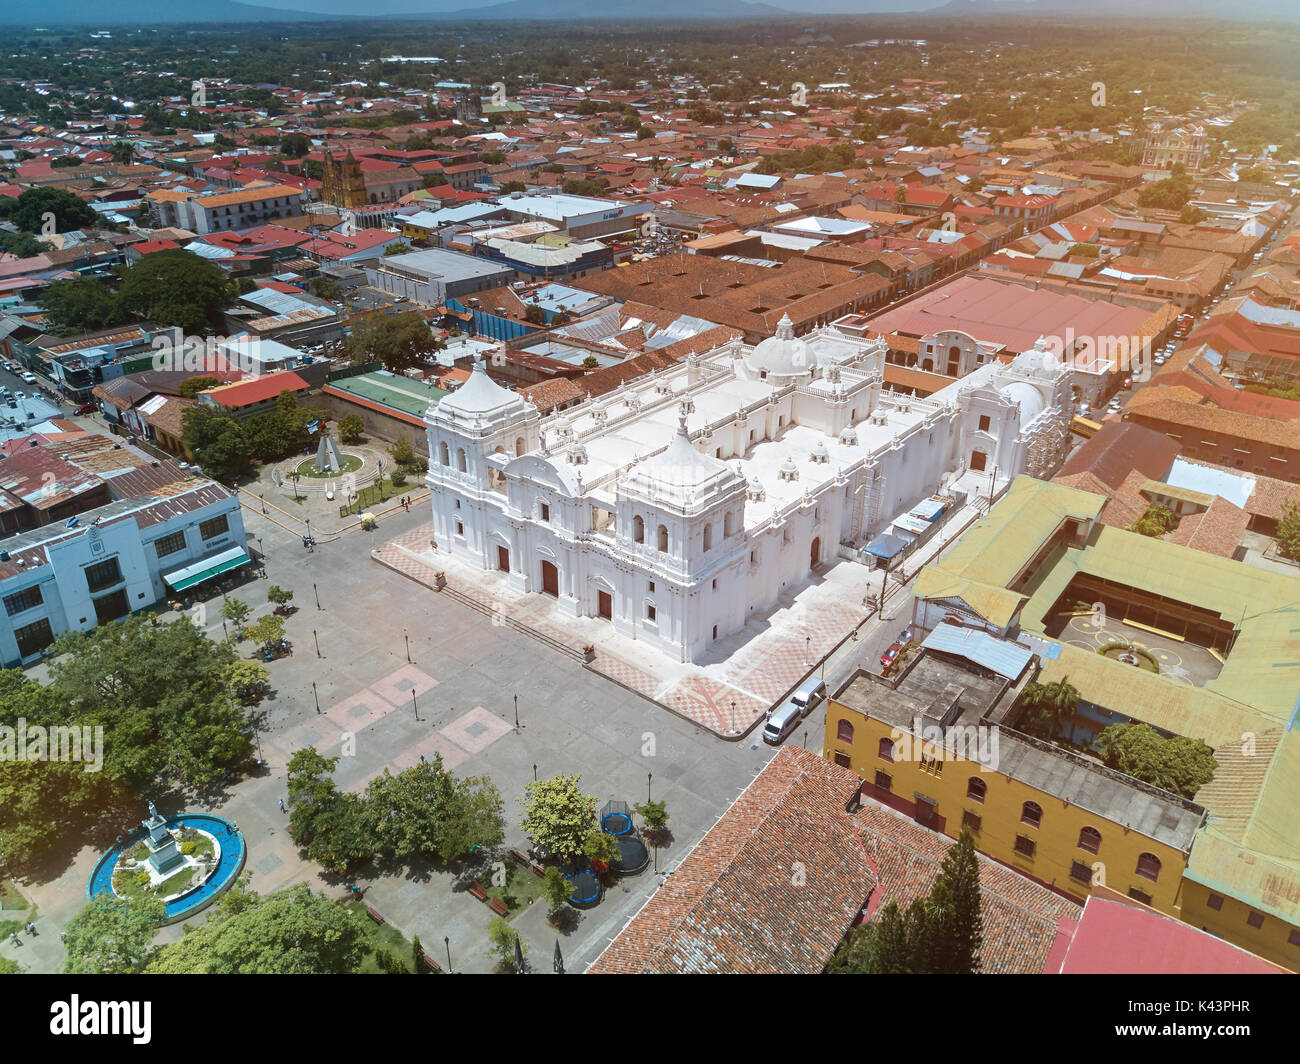 Main church in Leon town in Nicaragua above view Stock Photo